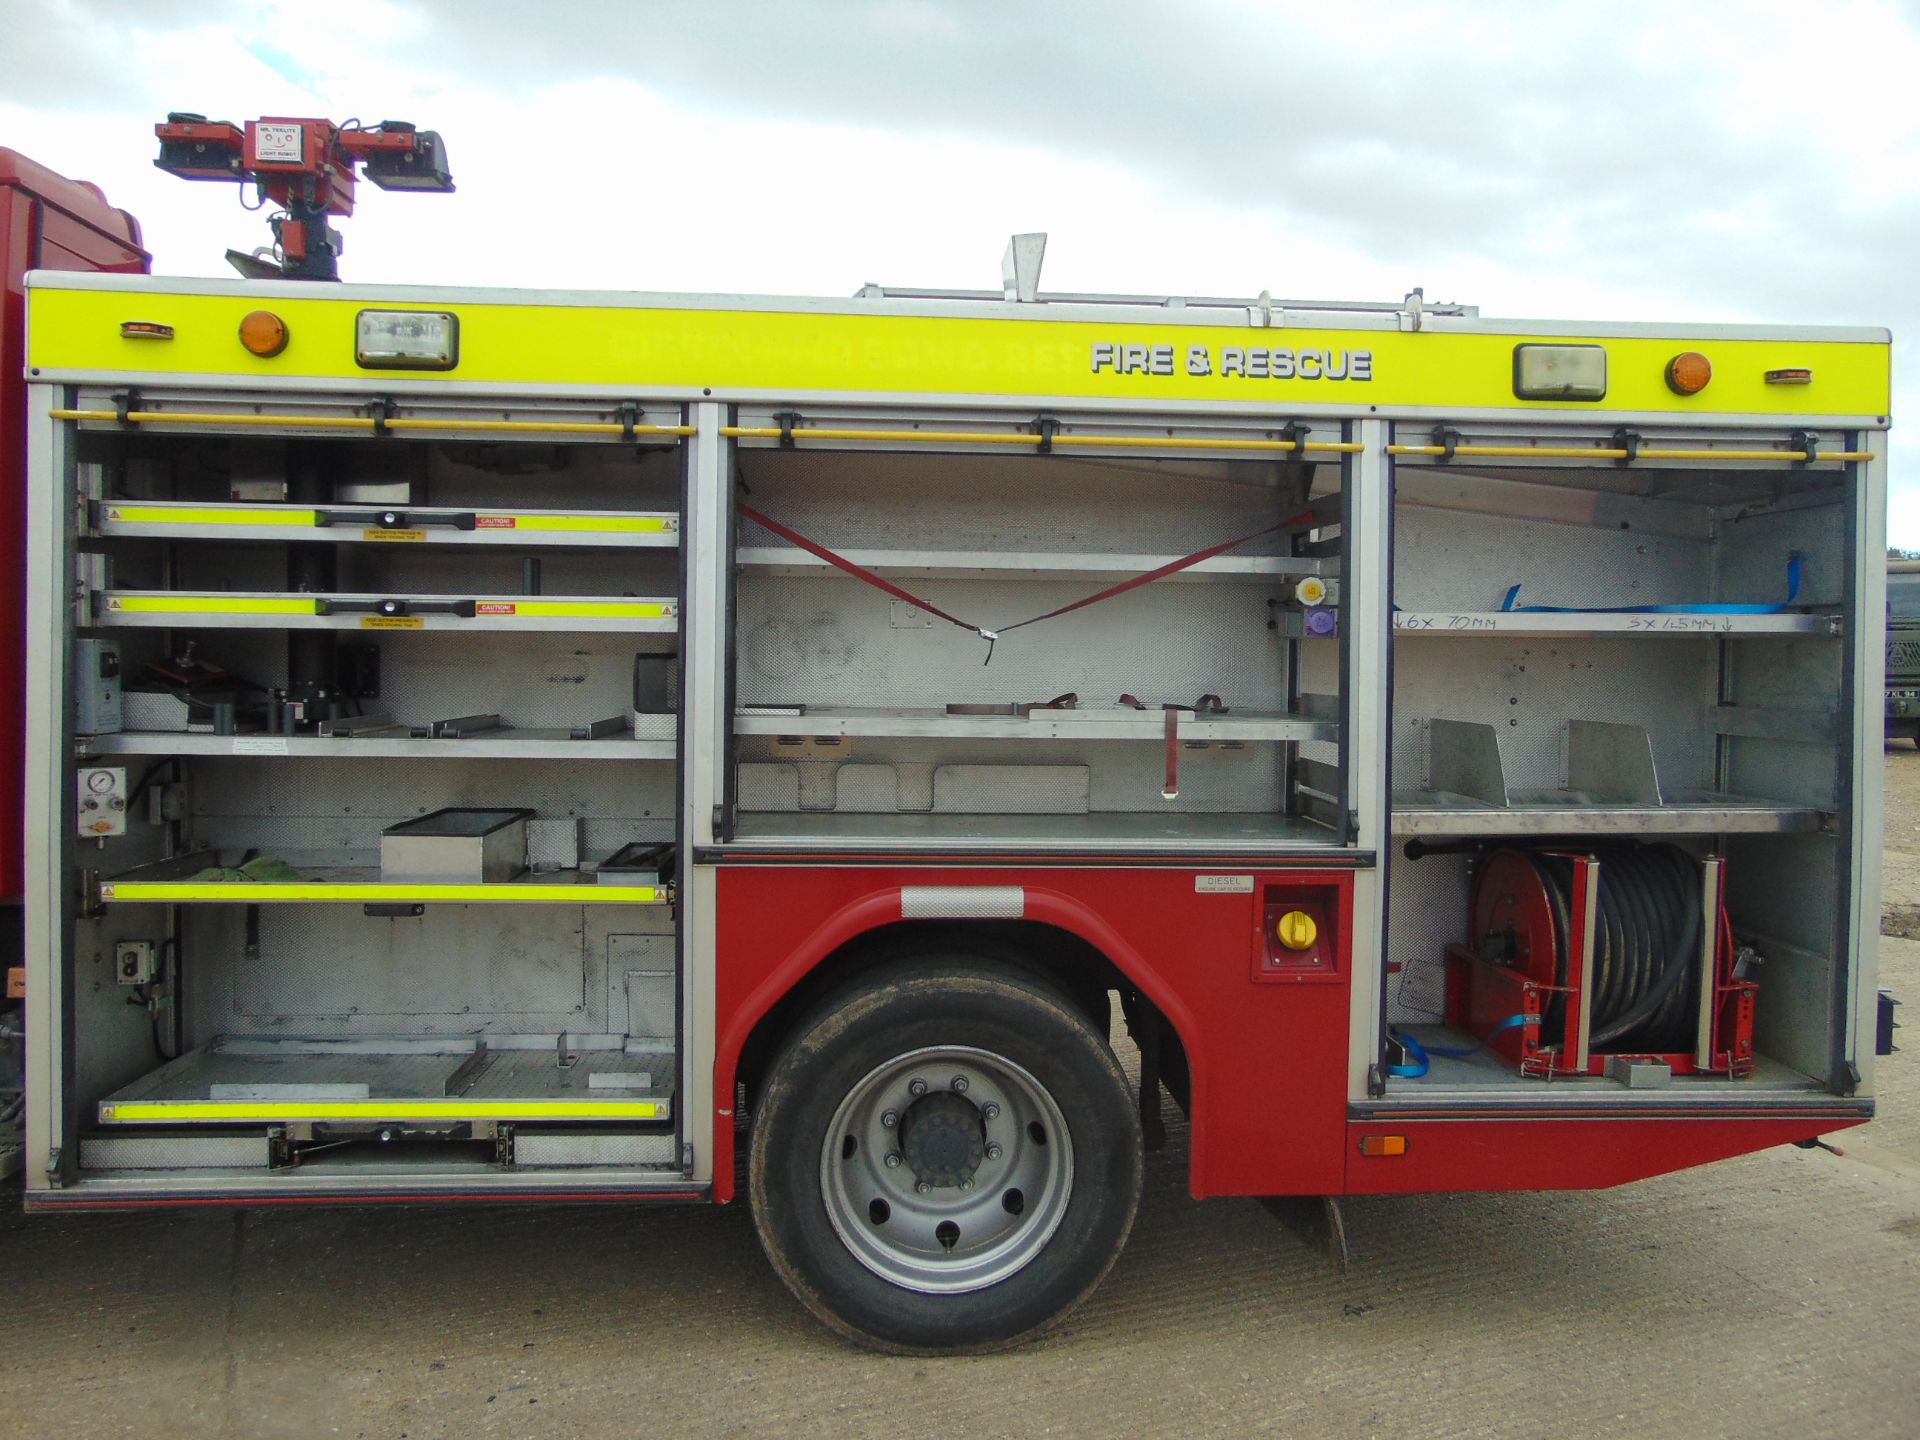 MAN LE 14.280 Fire Engine - Image 13 of 35